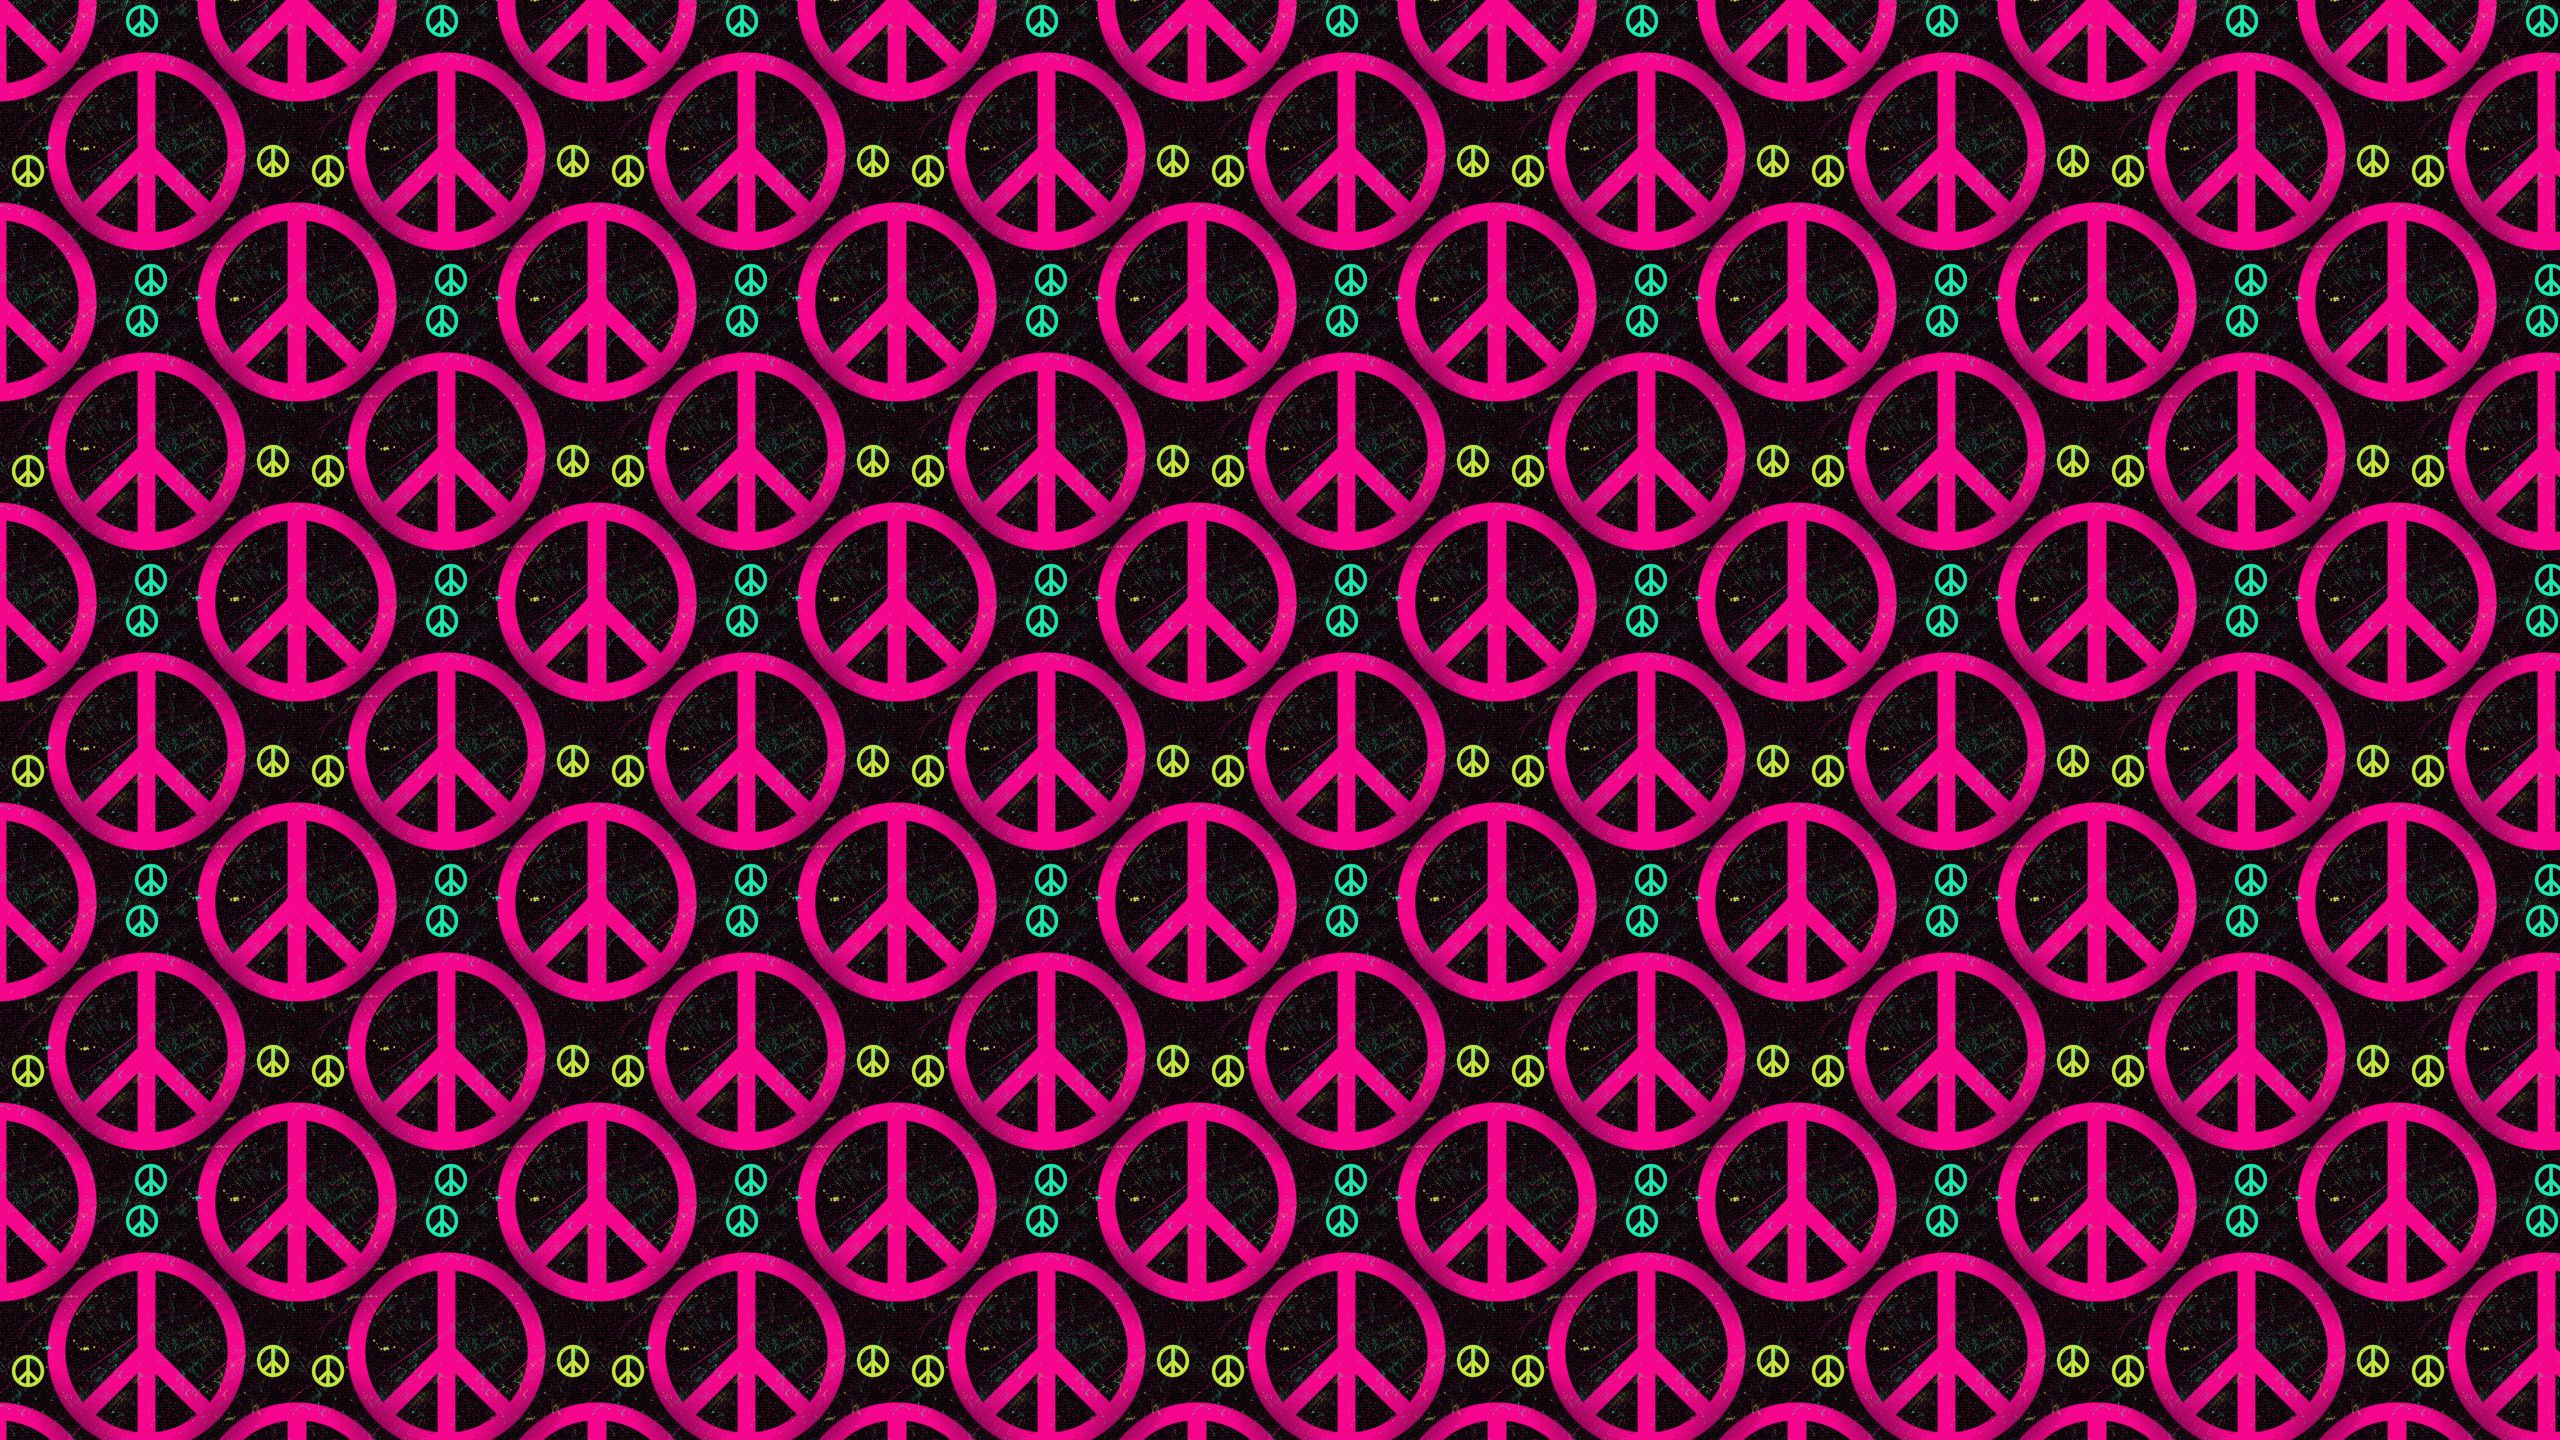 A pattern of pink peace signs on a black background - Peace